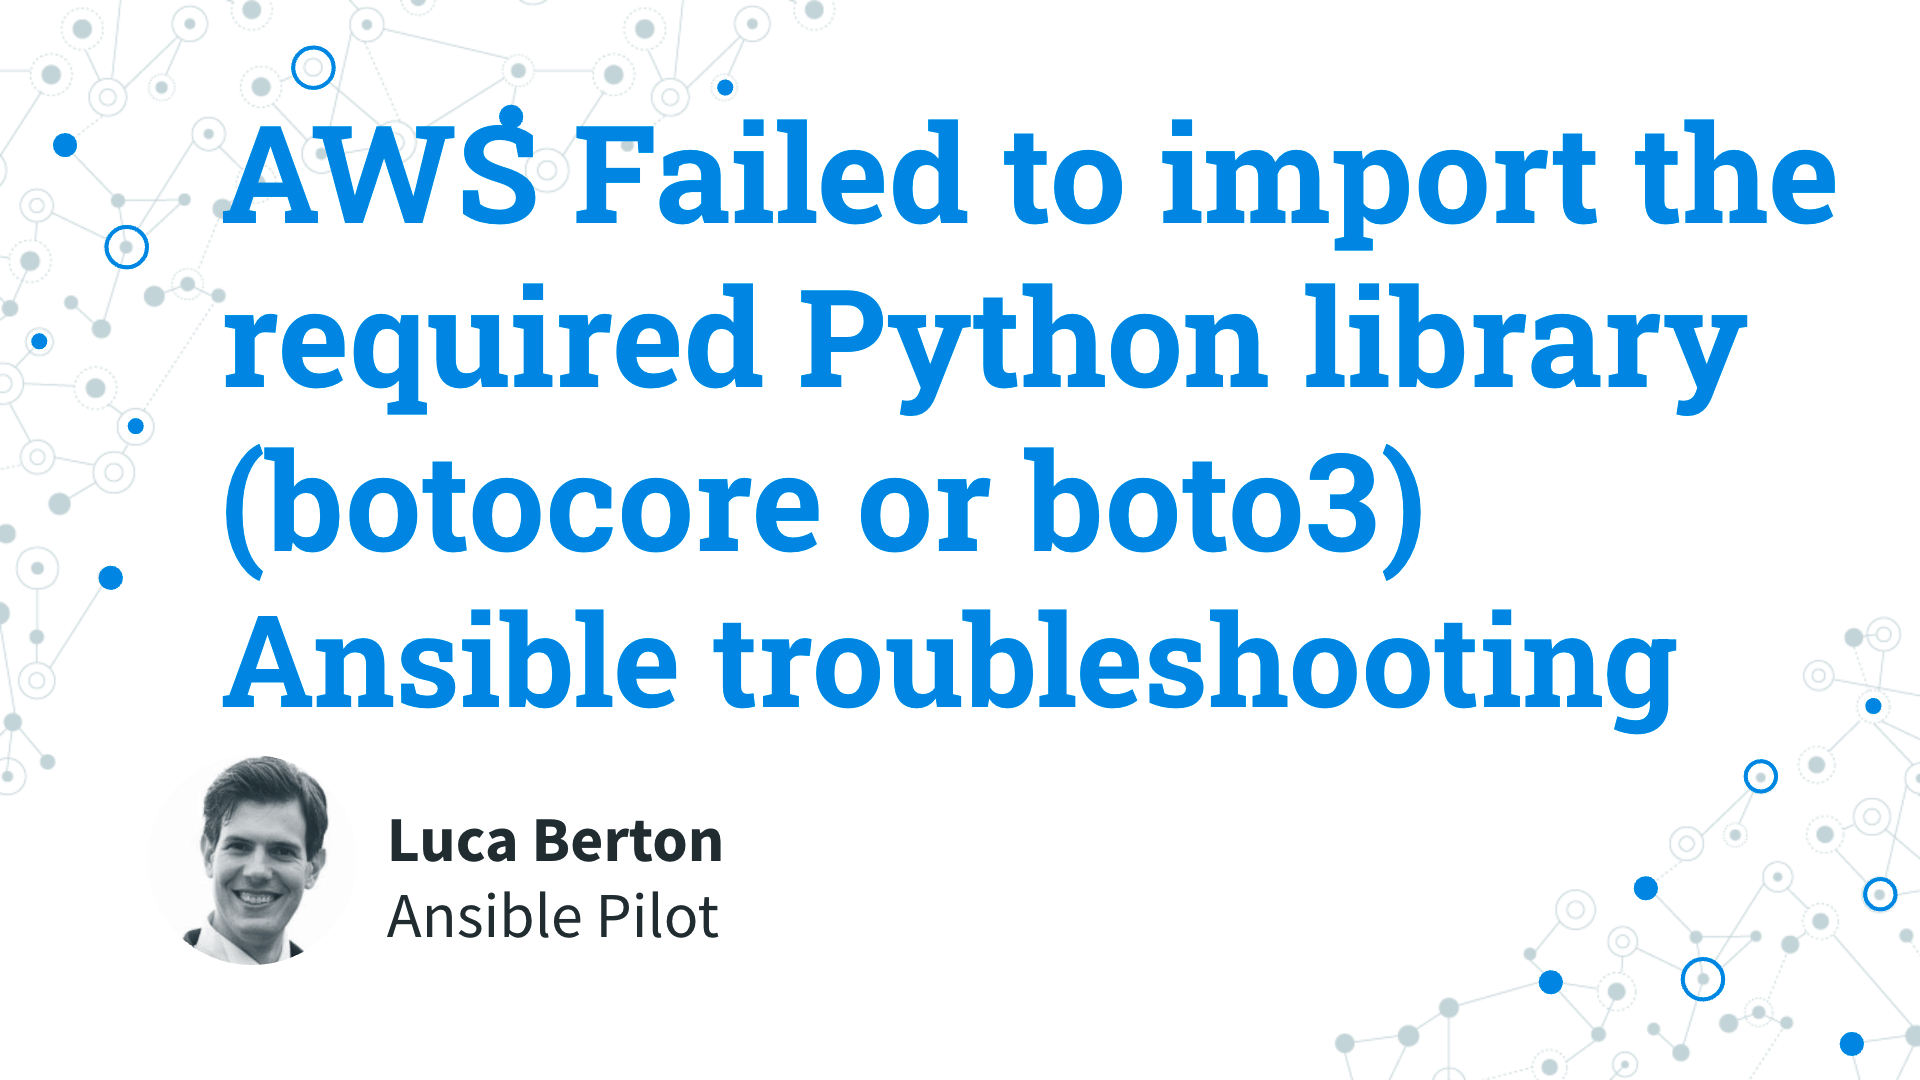 Ansible troubleshooting - AWS Failed to import the required Python library (botocore or boto3)